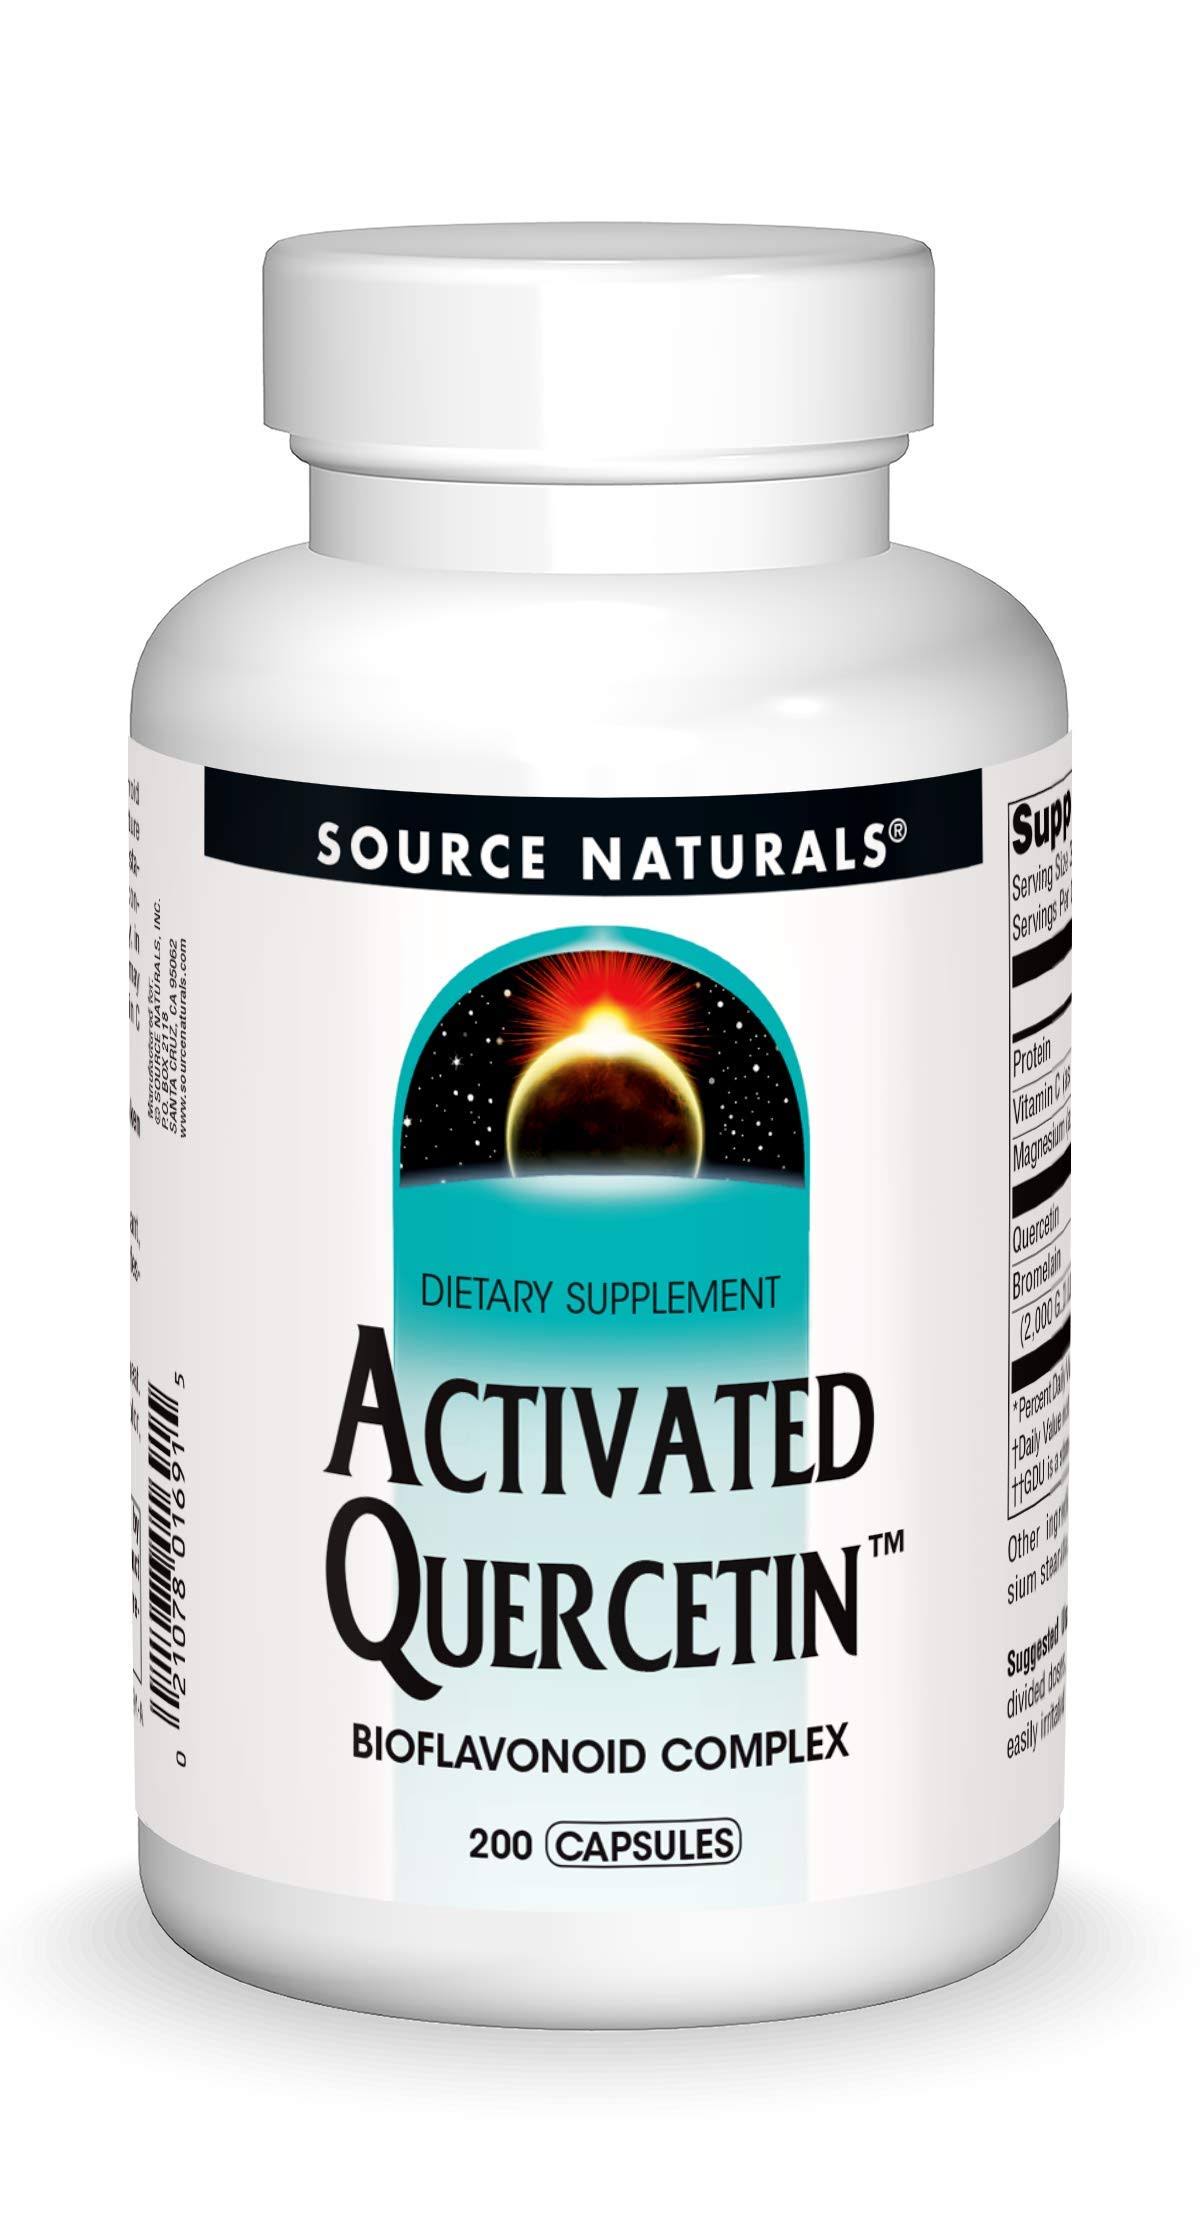 Source Naturals Activated Quercetin Dietary Supplement - 200 Tablets